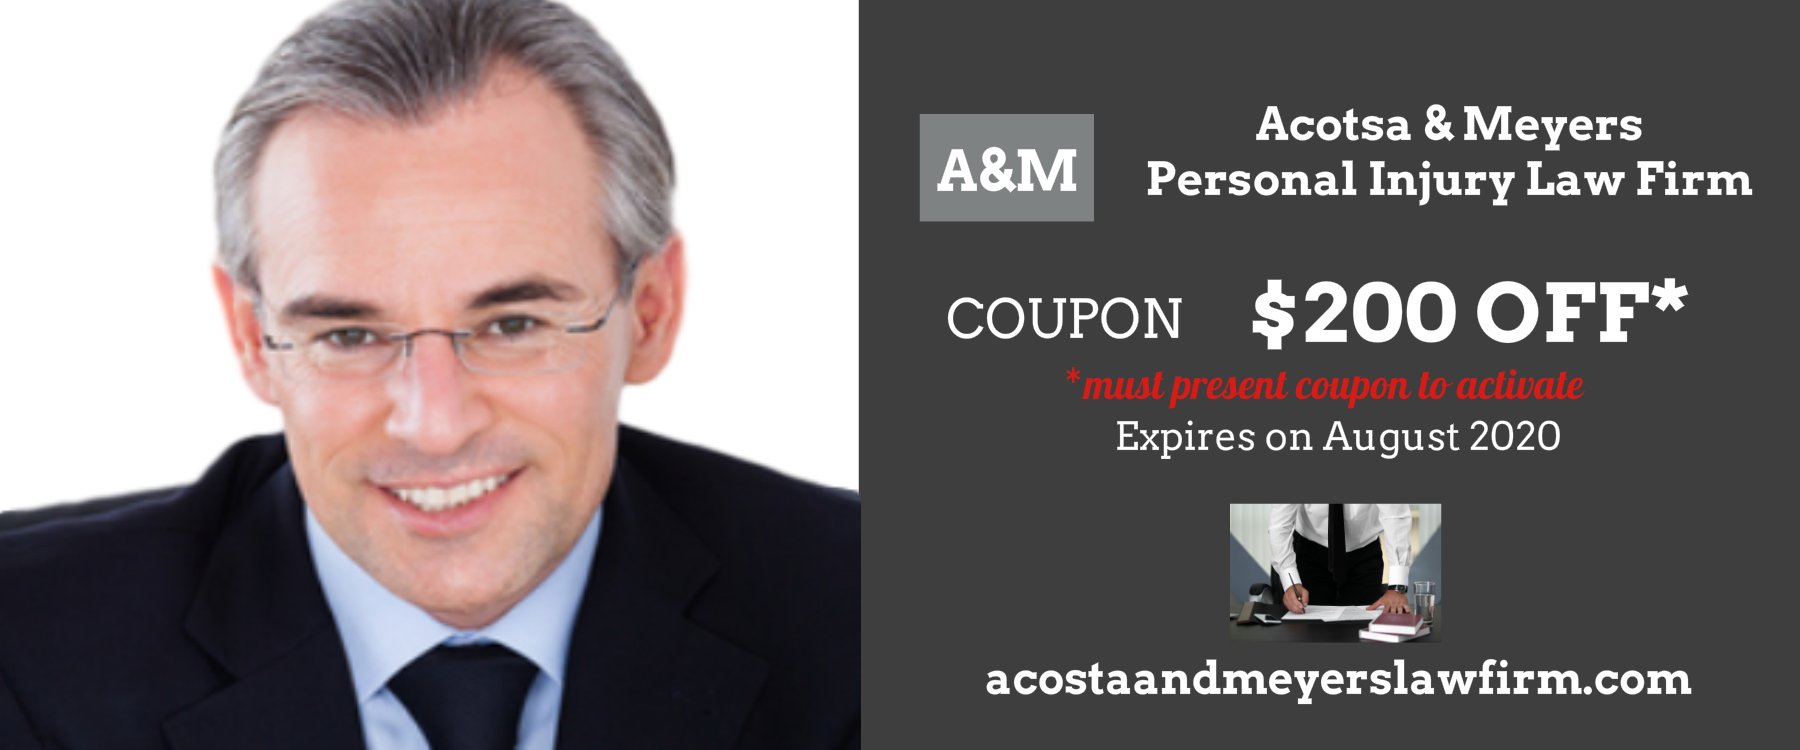 Attorney coupon